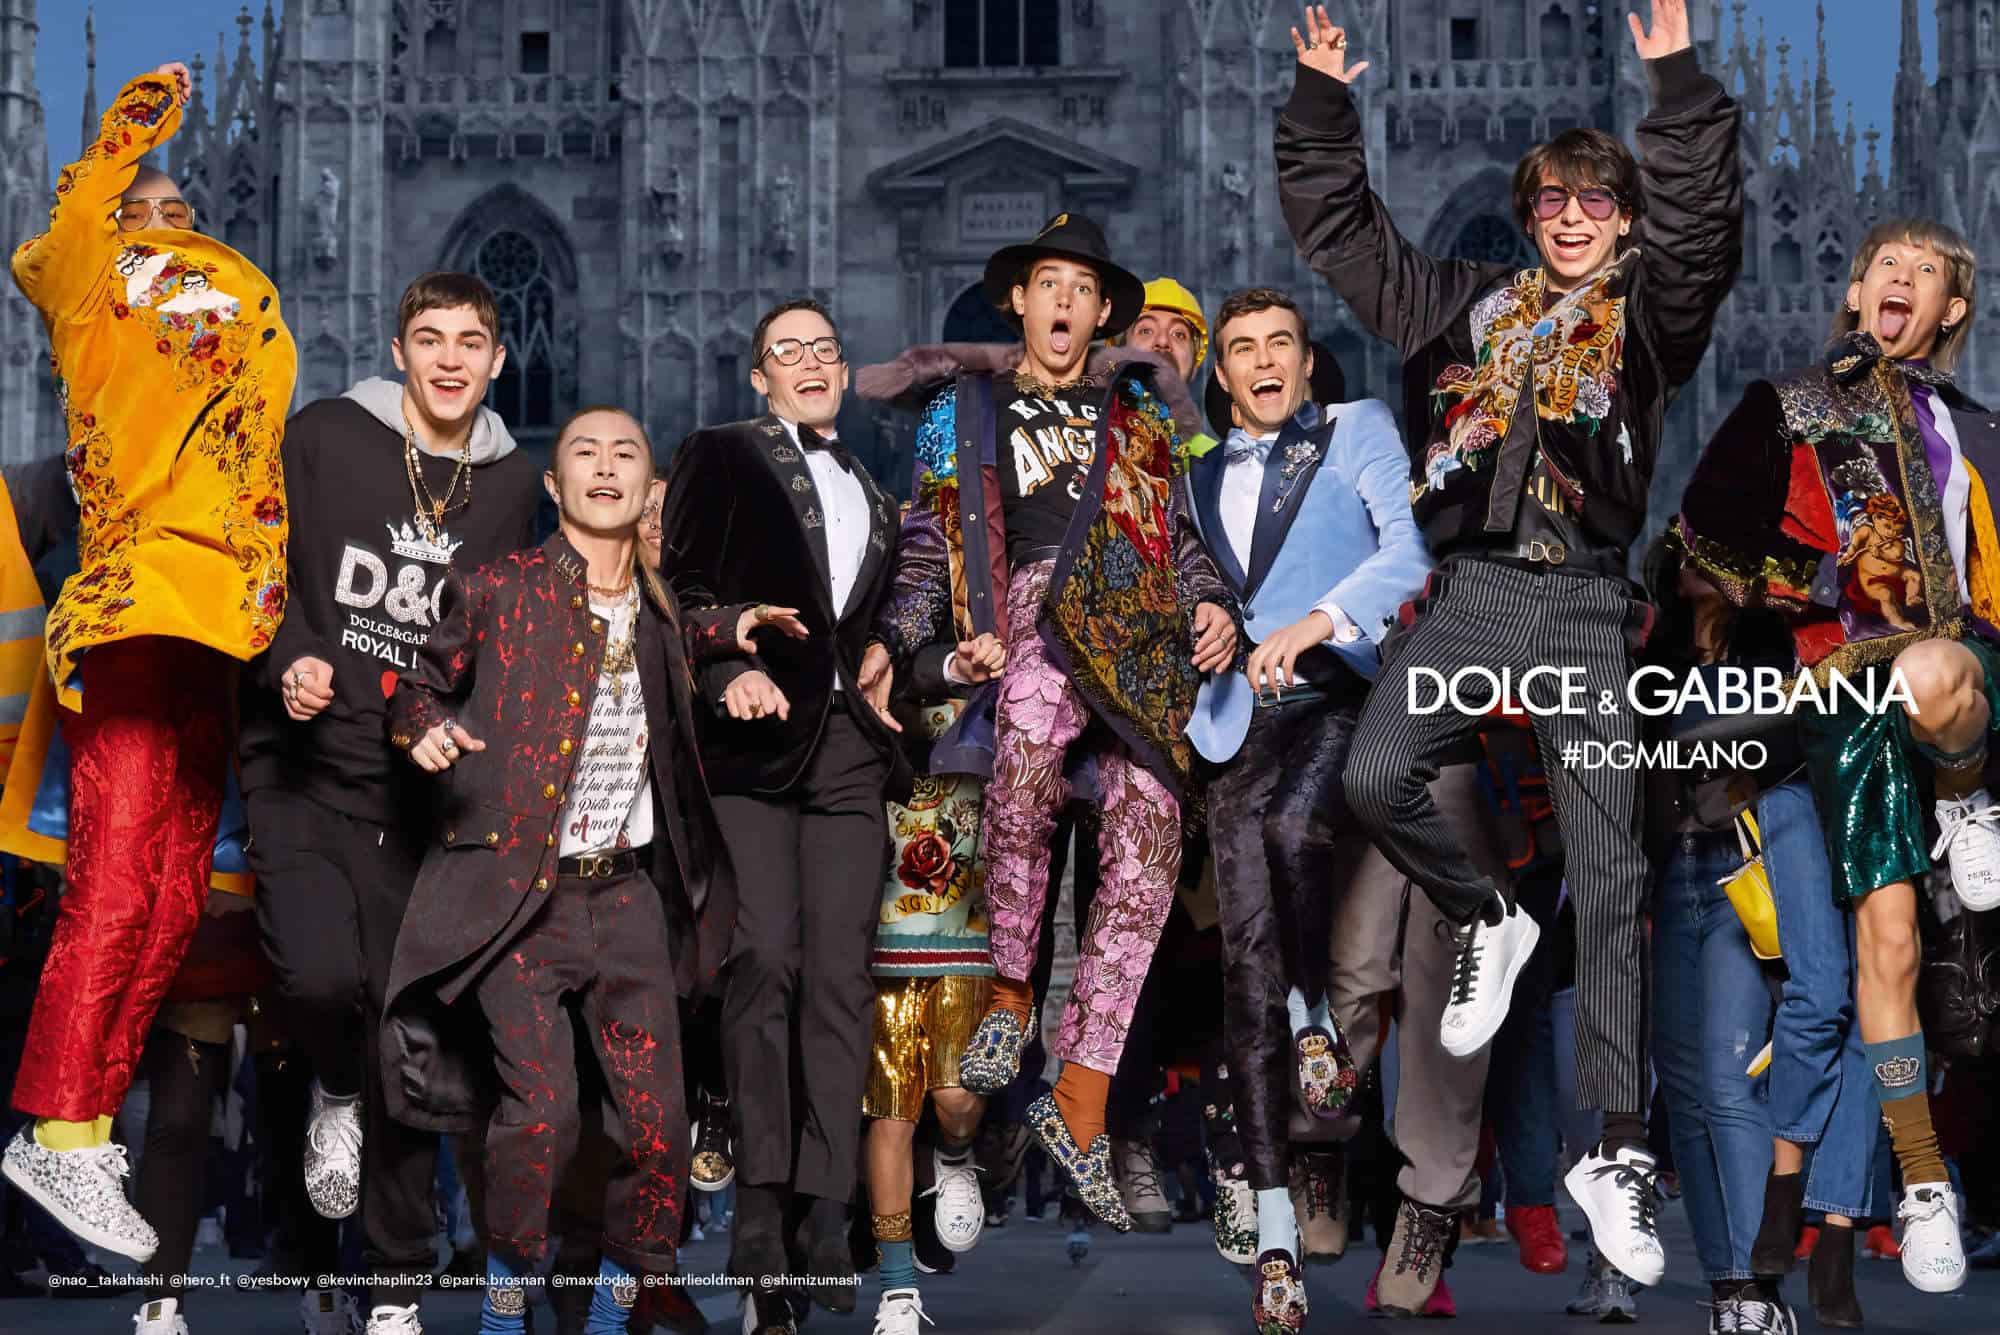 Dolce & Gabbana's New Campaign is Bursting at the Seams With Scions